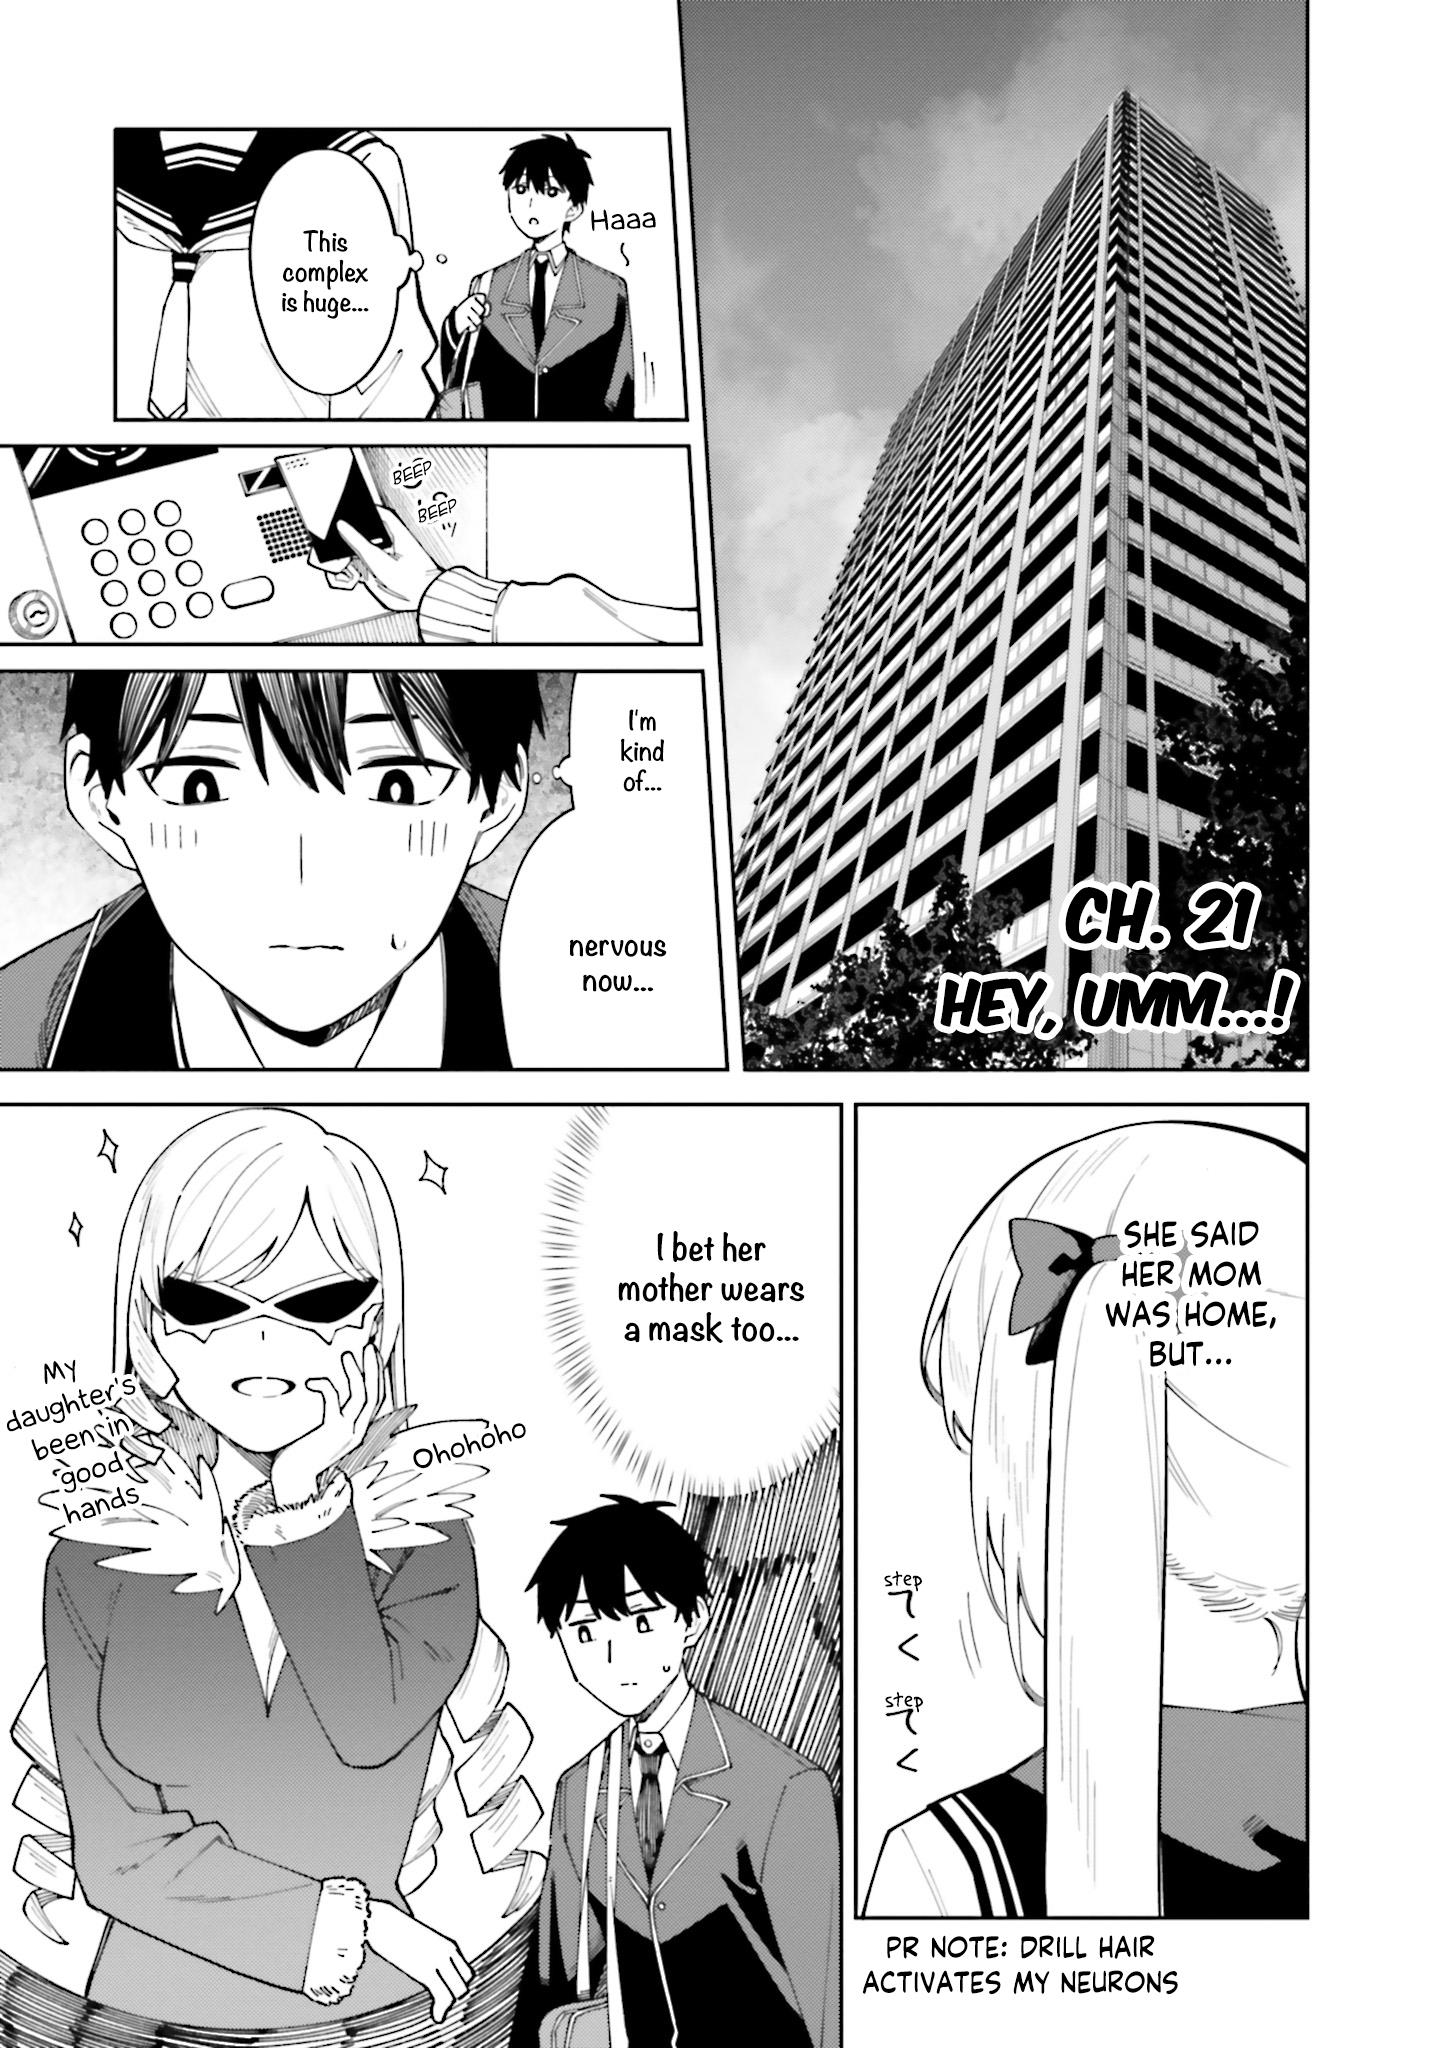 I Don't Understand Shirogane-San's Facial Expression At All Vol.4 Chapter 21 - Picture 2